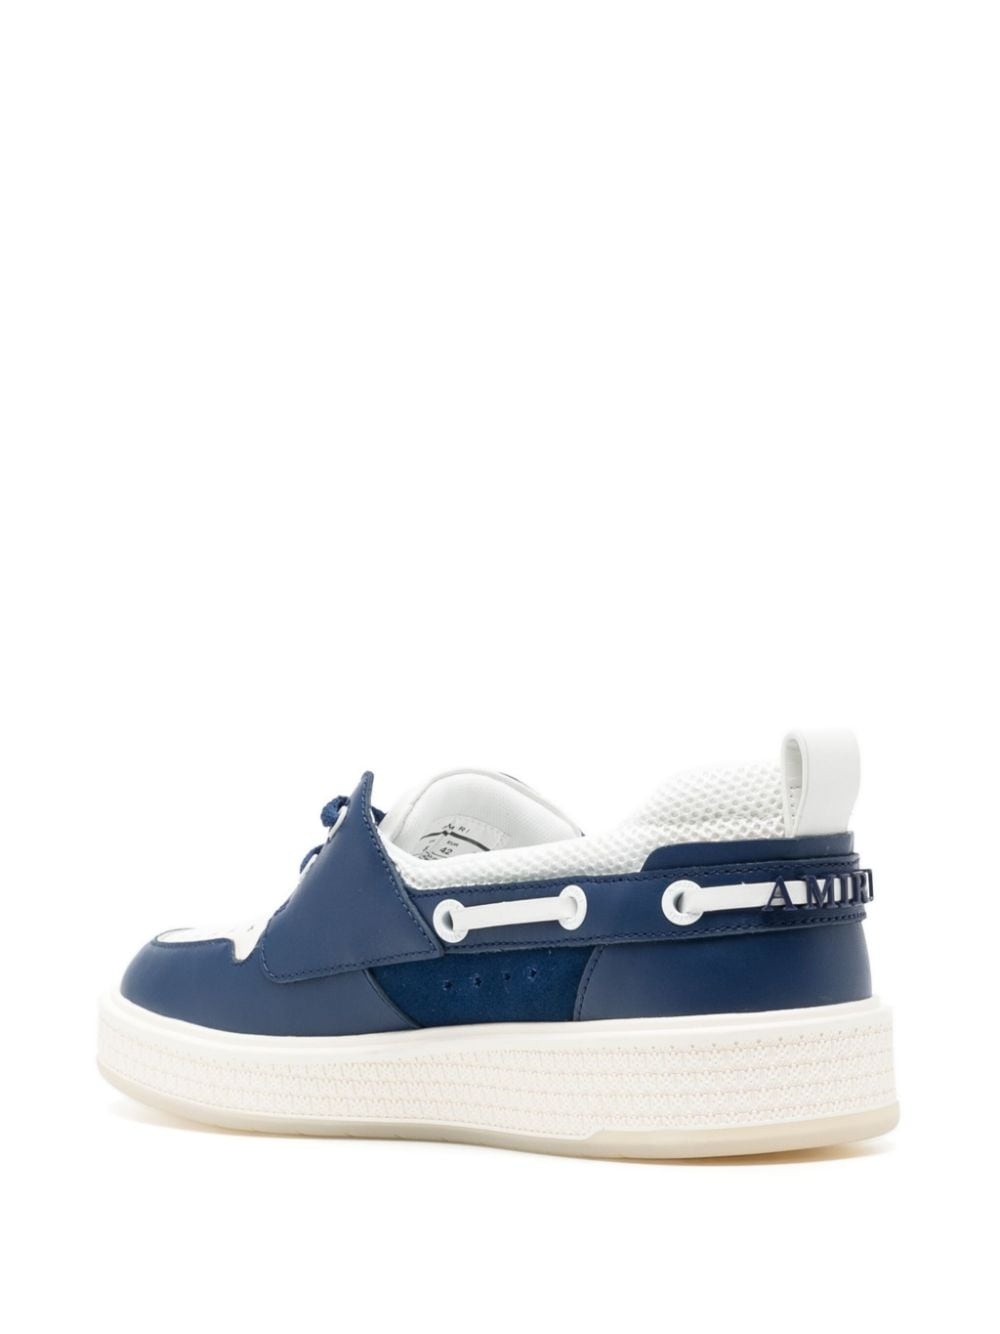 MA panelled boat shoes - 3